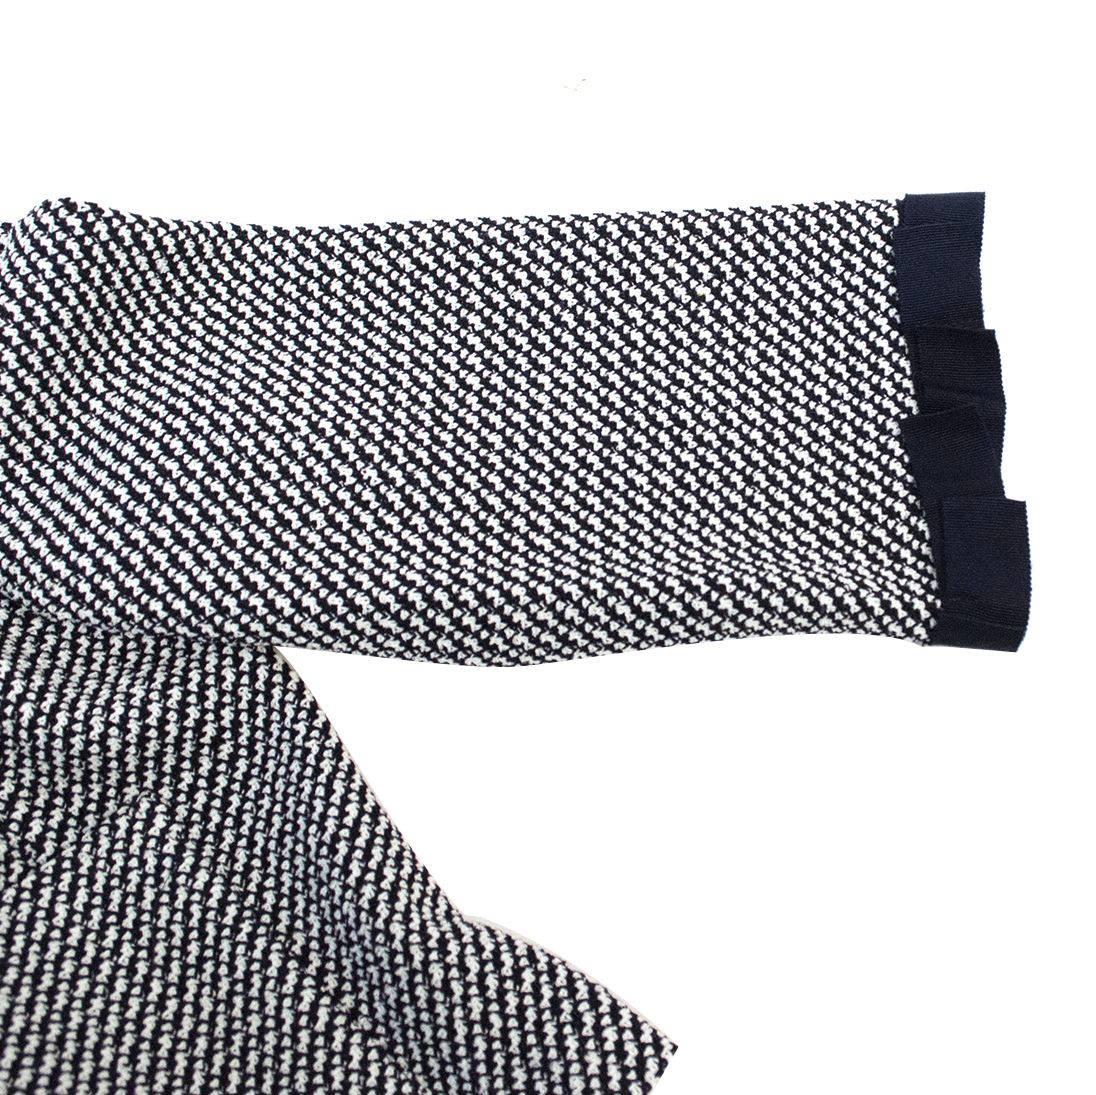 St. John Houndstooth Navy & White Dress and Jacket For Sale 2